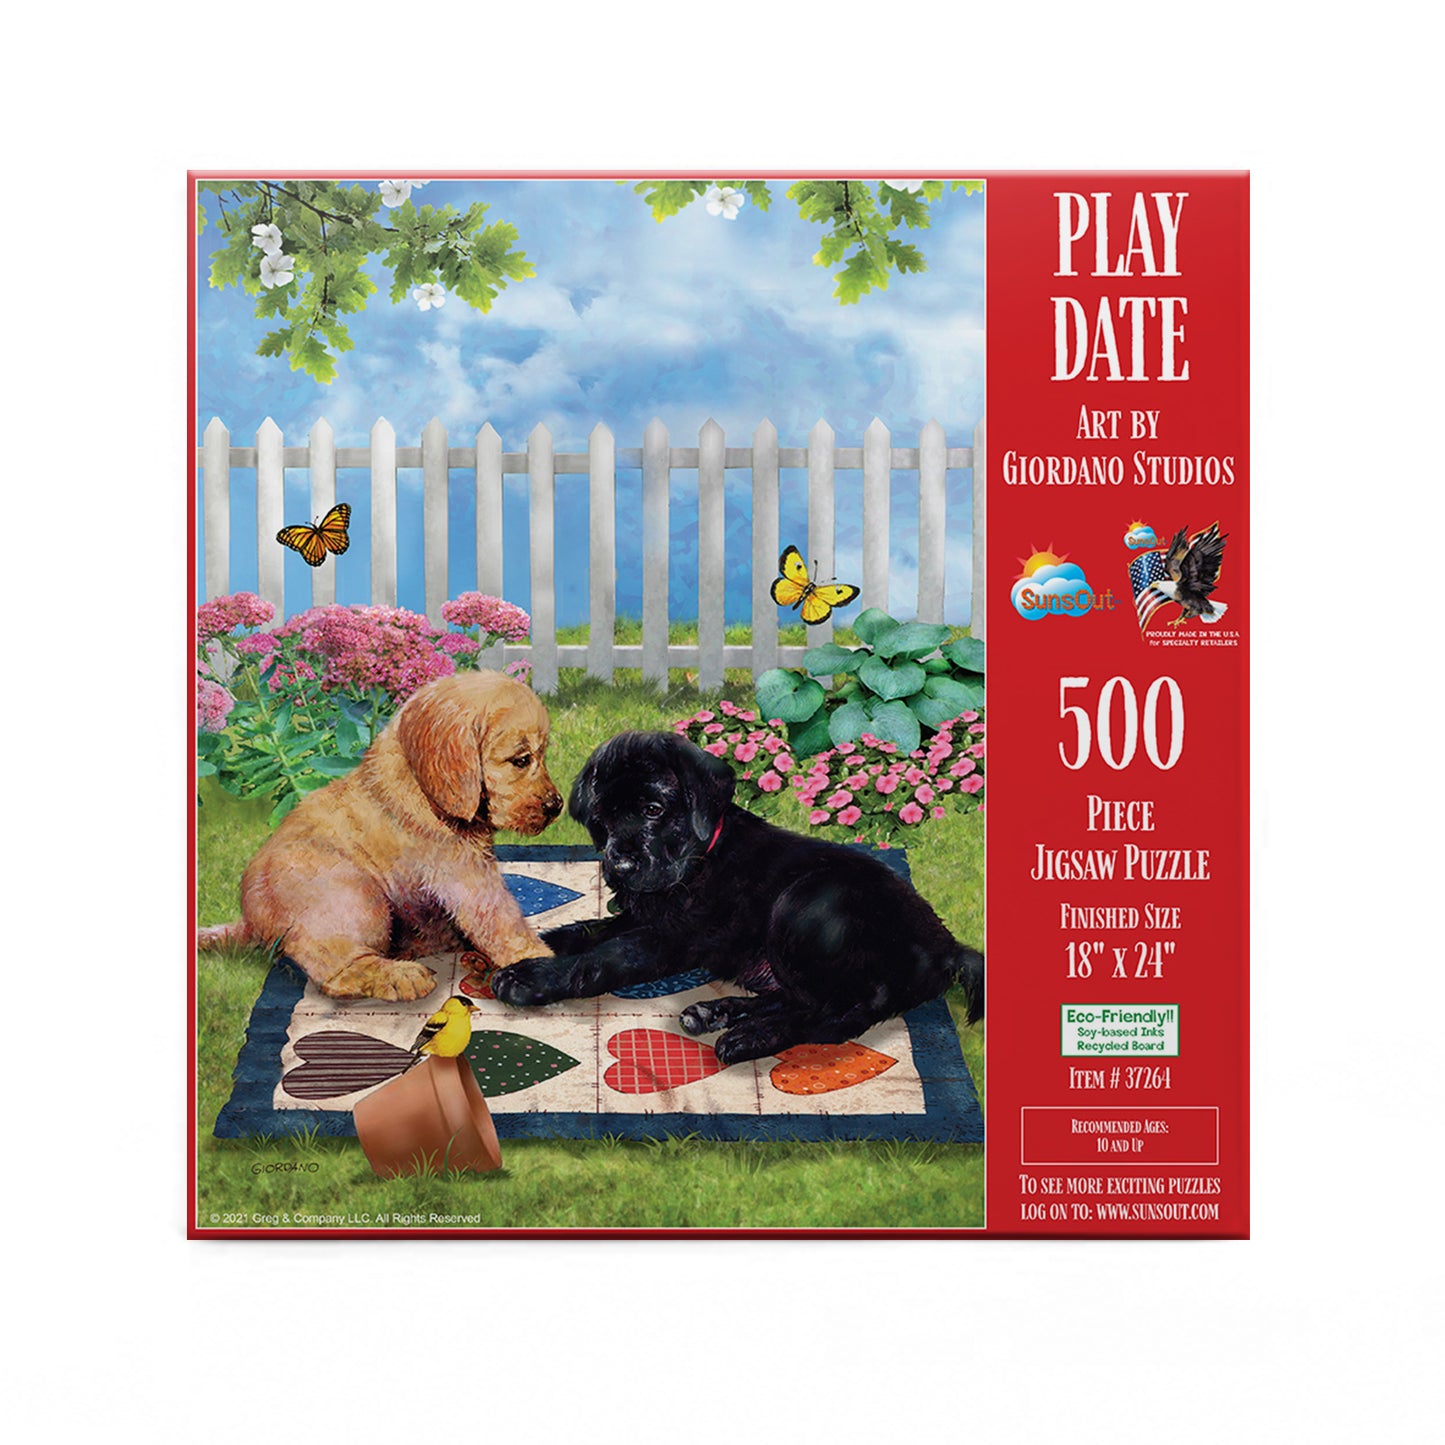 Play Date - 500 Piece Jigsaw Puzzle